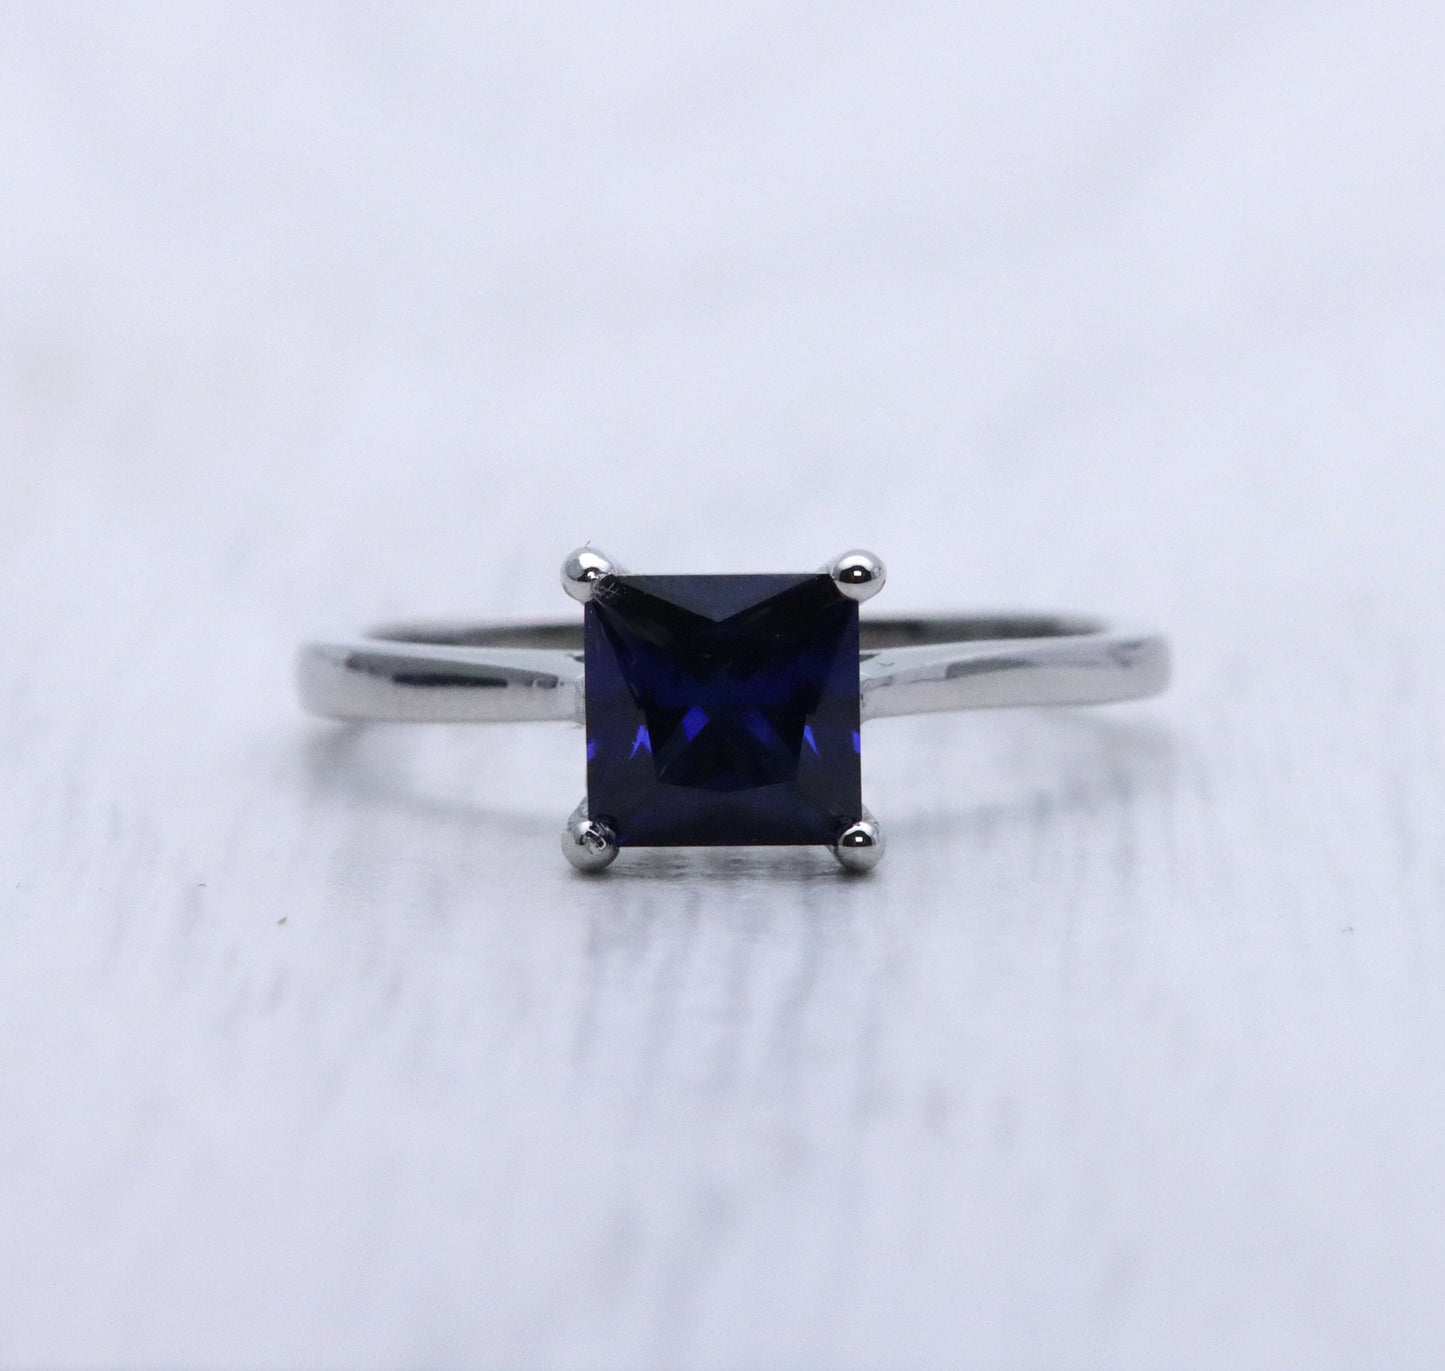 1ct Princess Cut lab blue sapphire Solitaire cathedral ring in Titanium or White Gold